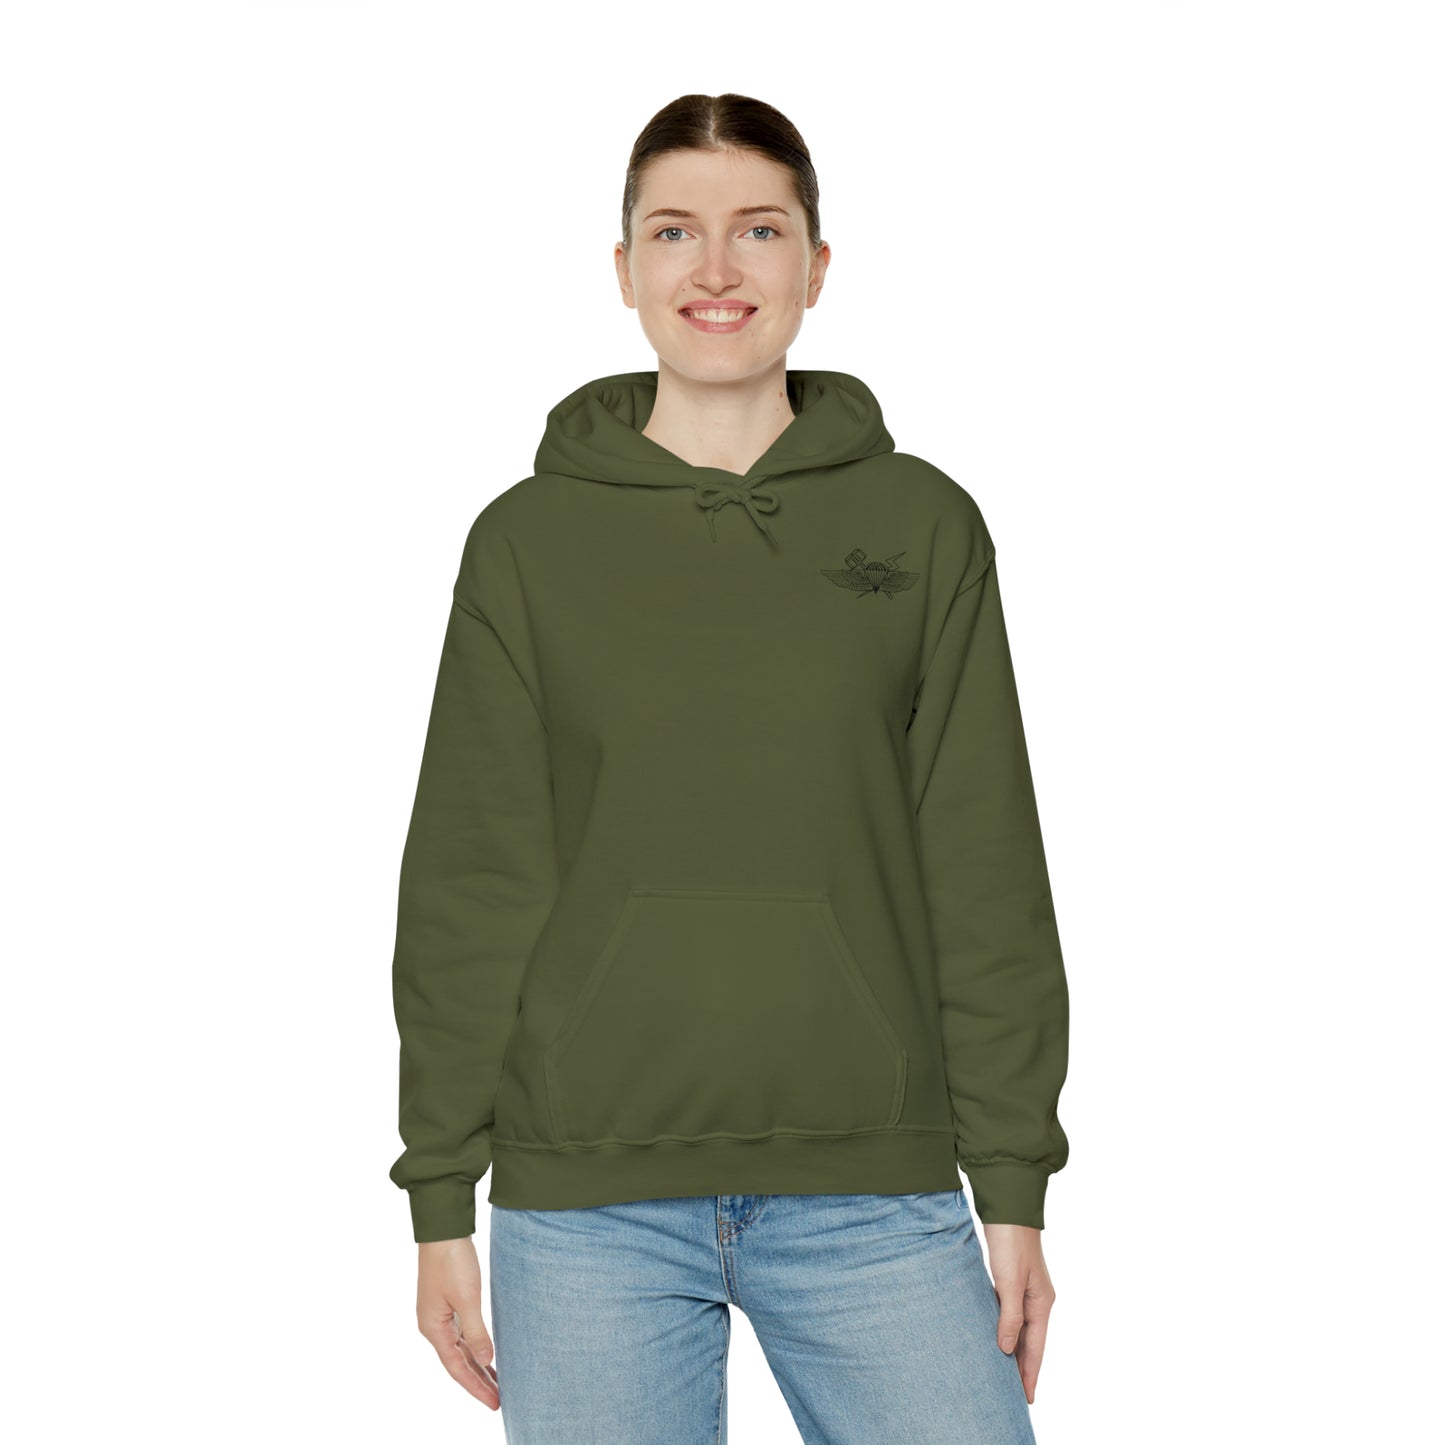 3rd ANGLICO Motor-T Hoodie